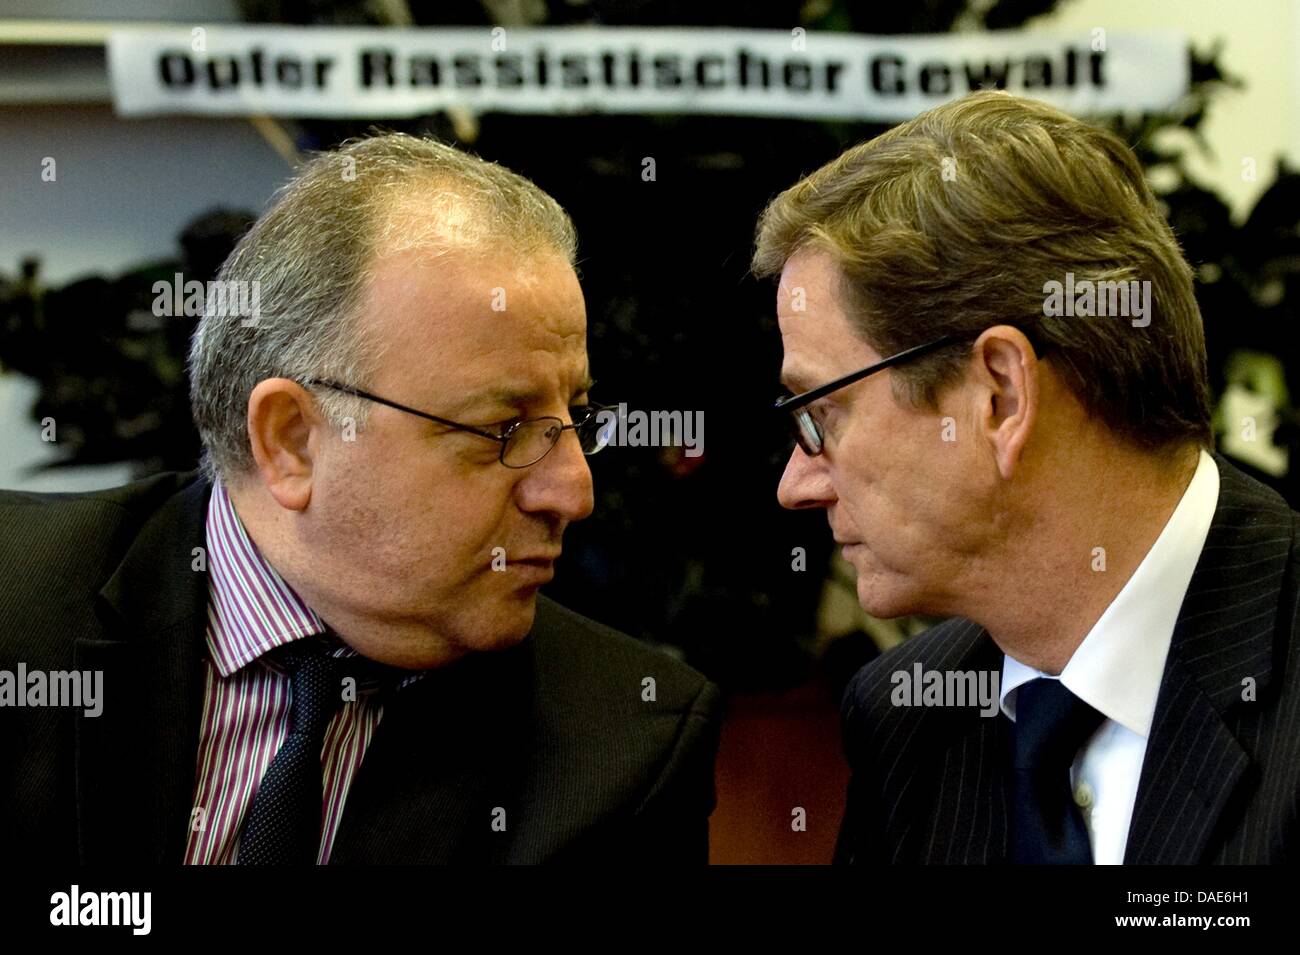 German Foreign Minister Guido Westerwelle and Kenan Kolat (L), Chairman of the Turkish Community in Germany, speak in the headquarters of the Turkish Community in Germany in Berlin, Germany, 15 November 2011. The reason for the visit is the newest information about the right-wing motivated murders of foreign fellow citizens. Photo: SEBASTIAN KAHNERT Stock Photo